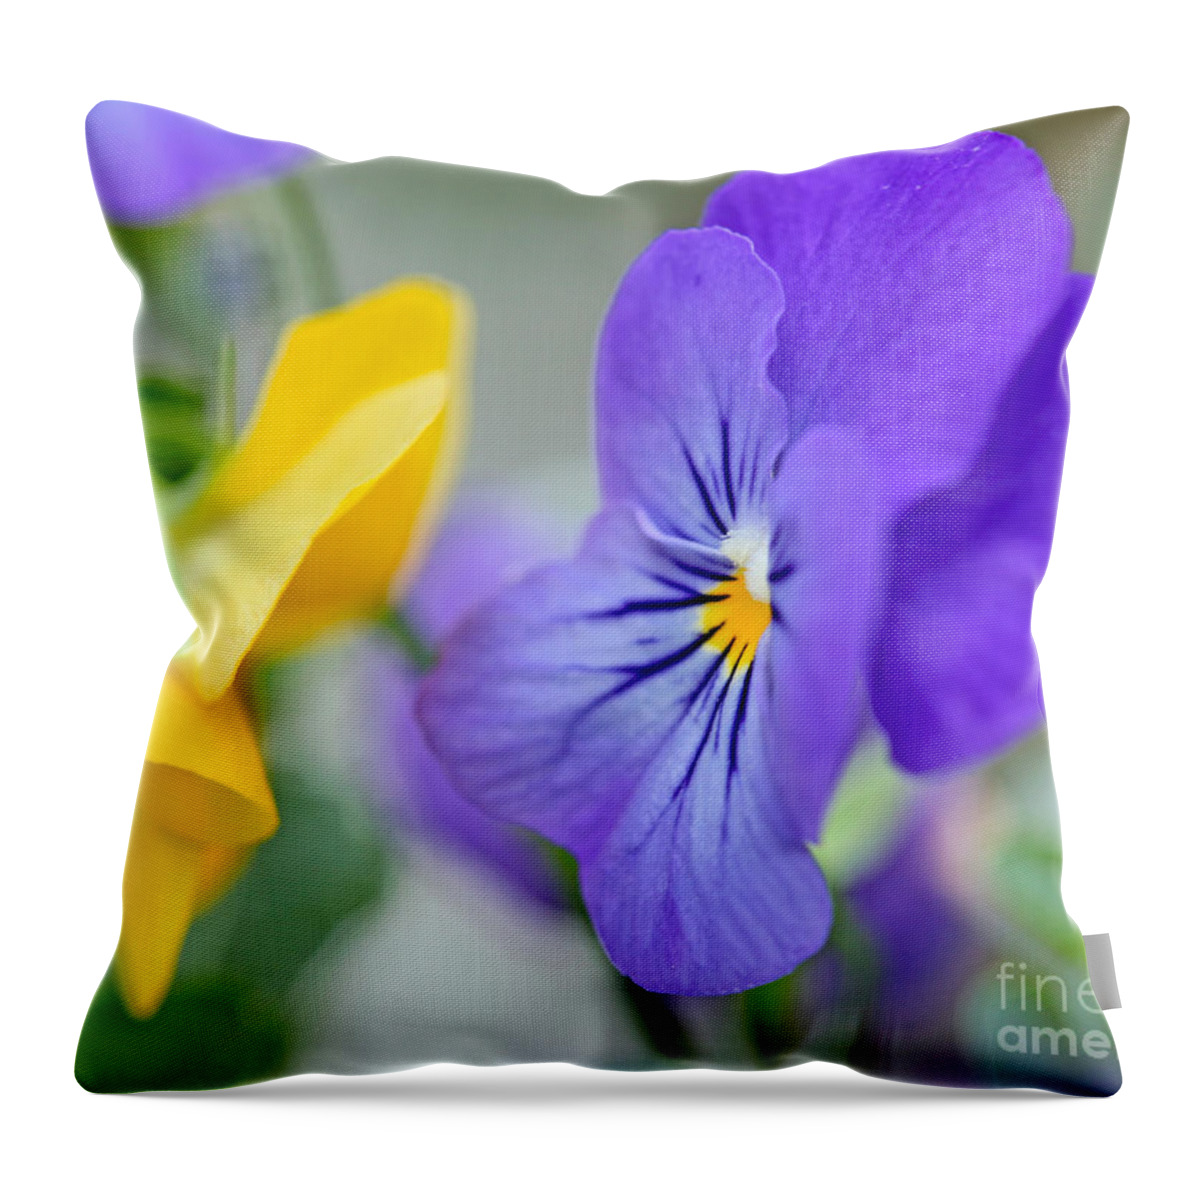 Pansy Print Throw Pillow featuring the photograph Two Pansies ln Love by Luana K Perez